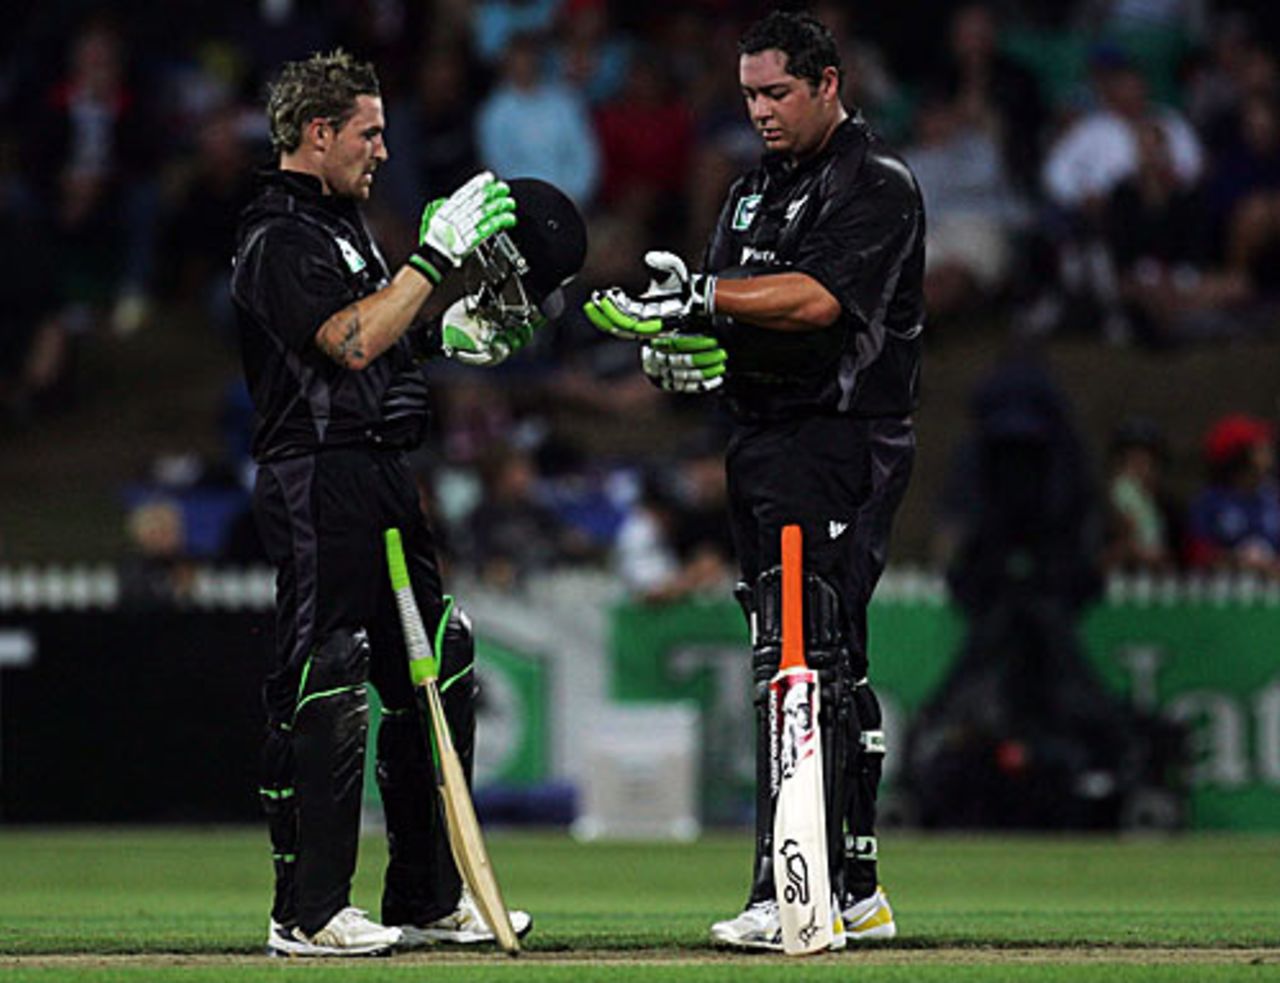 Brendon McCullum and Jesse Ryder take a breather during their rollicking partnership, New Zealand v England, 2nd ODI, Hamilton, February 12, 2008